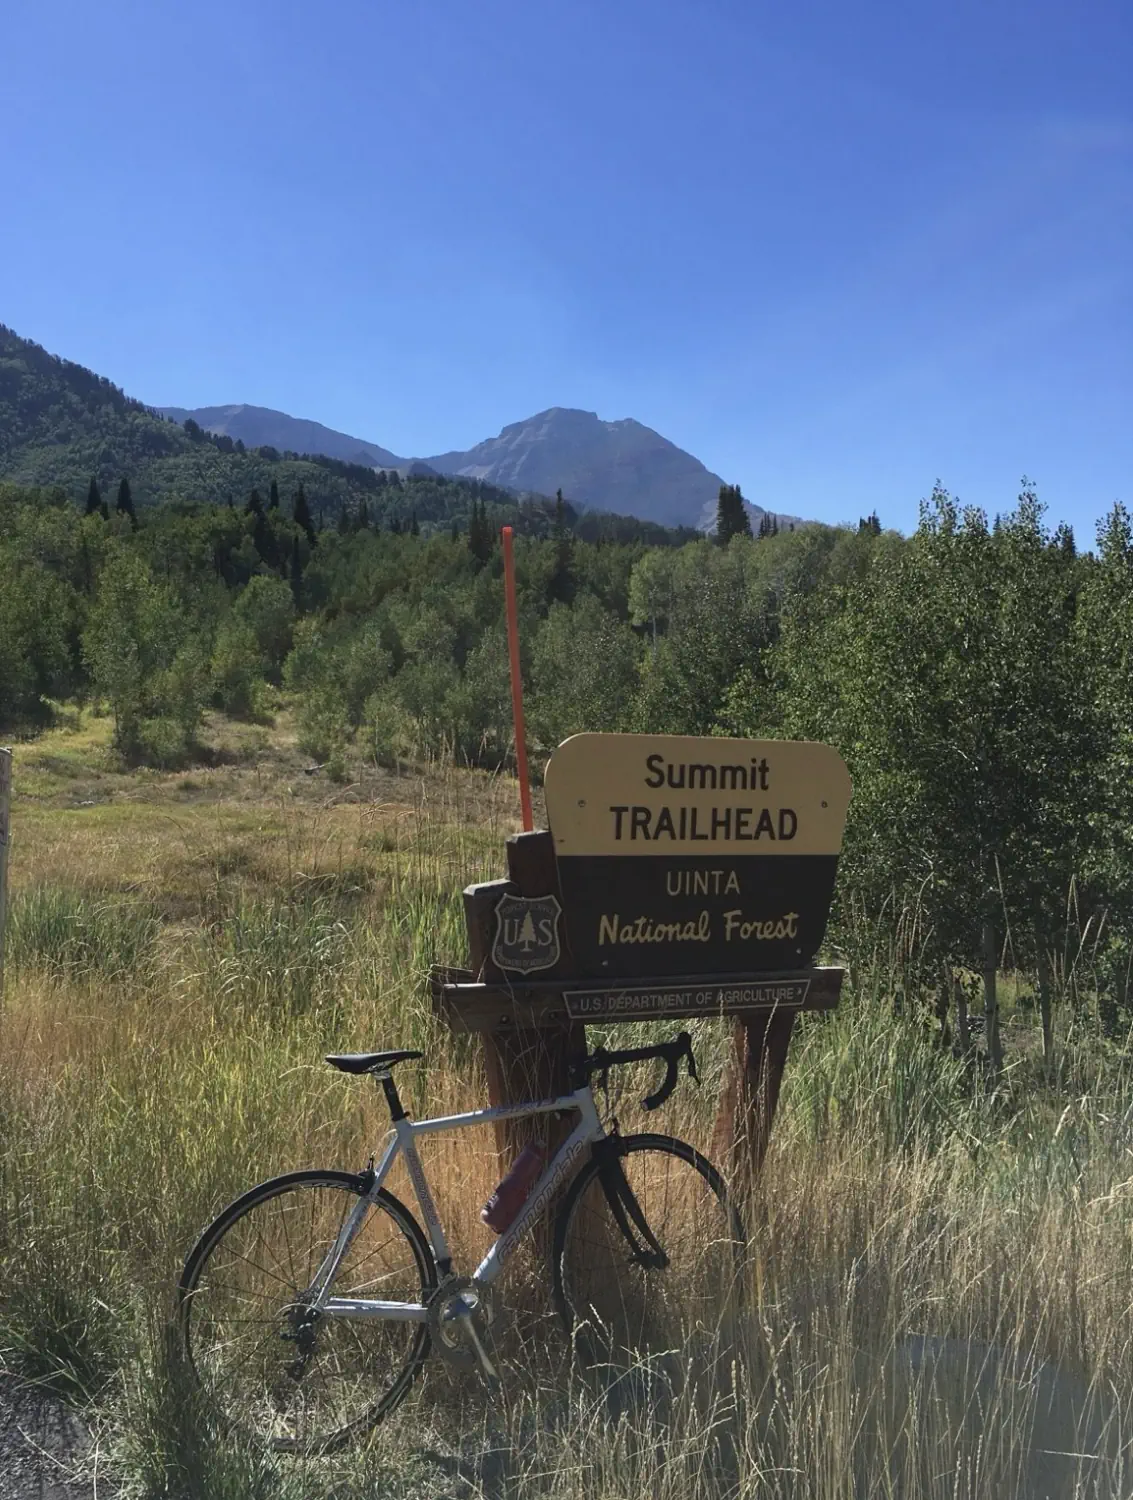 Yi's bike at the Uinta National Forest sign as he rode the Alpine Loop